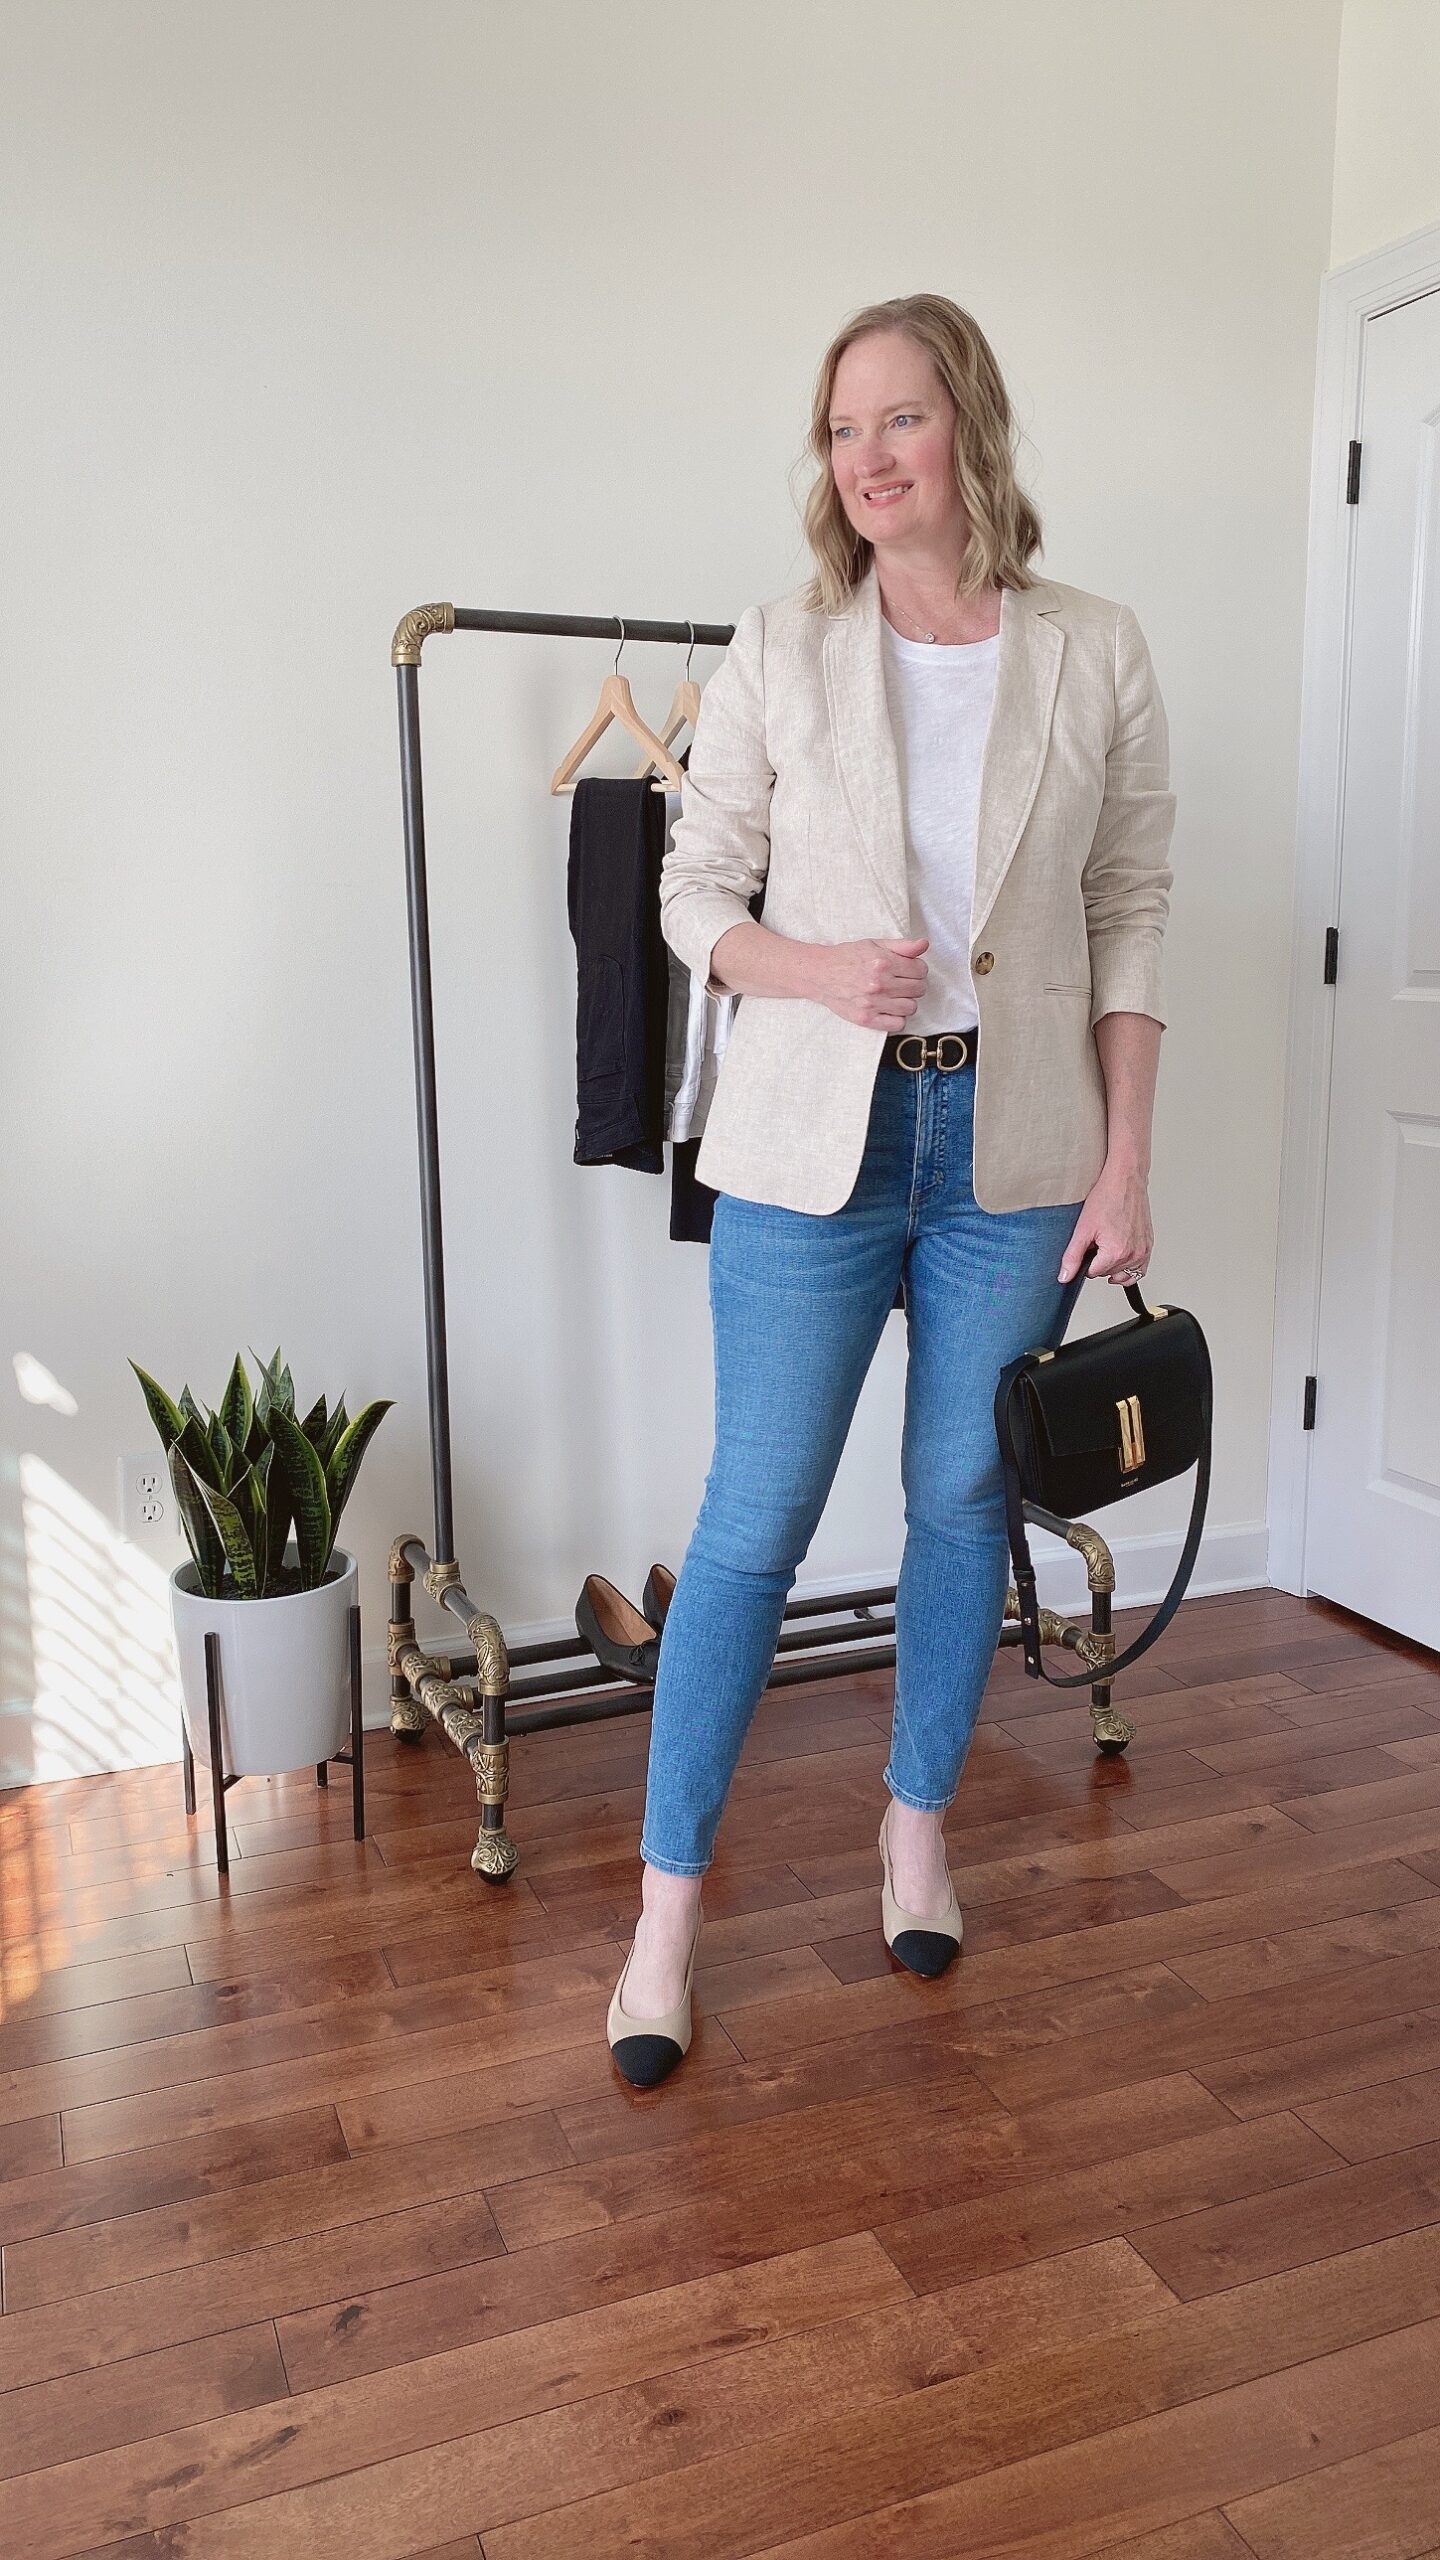 SMART CASUAL 10 X 9 WARDROBE CHALLENGE - OUTFIT DAY 1